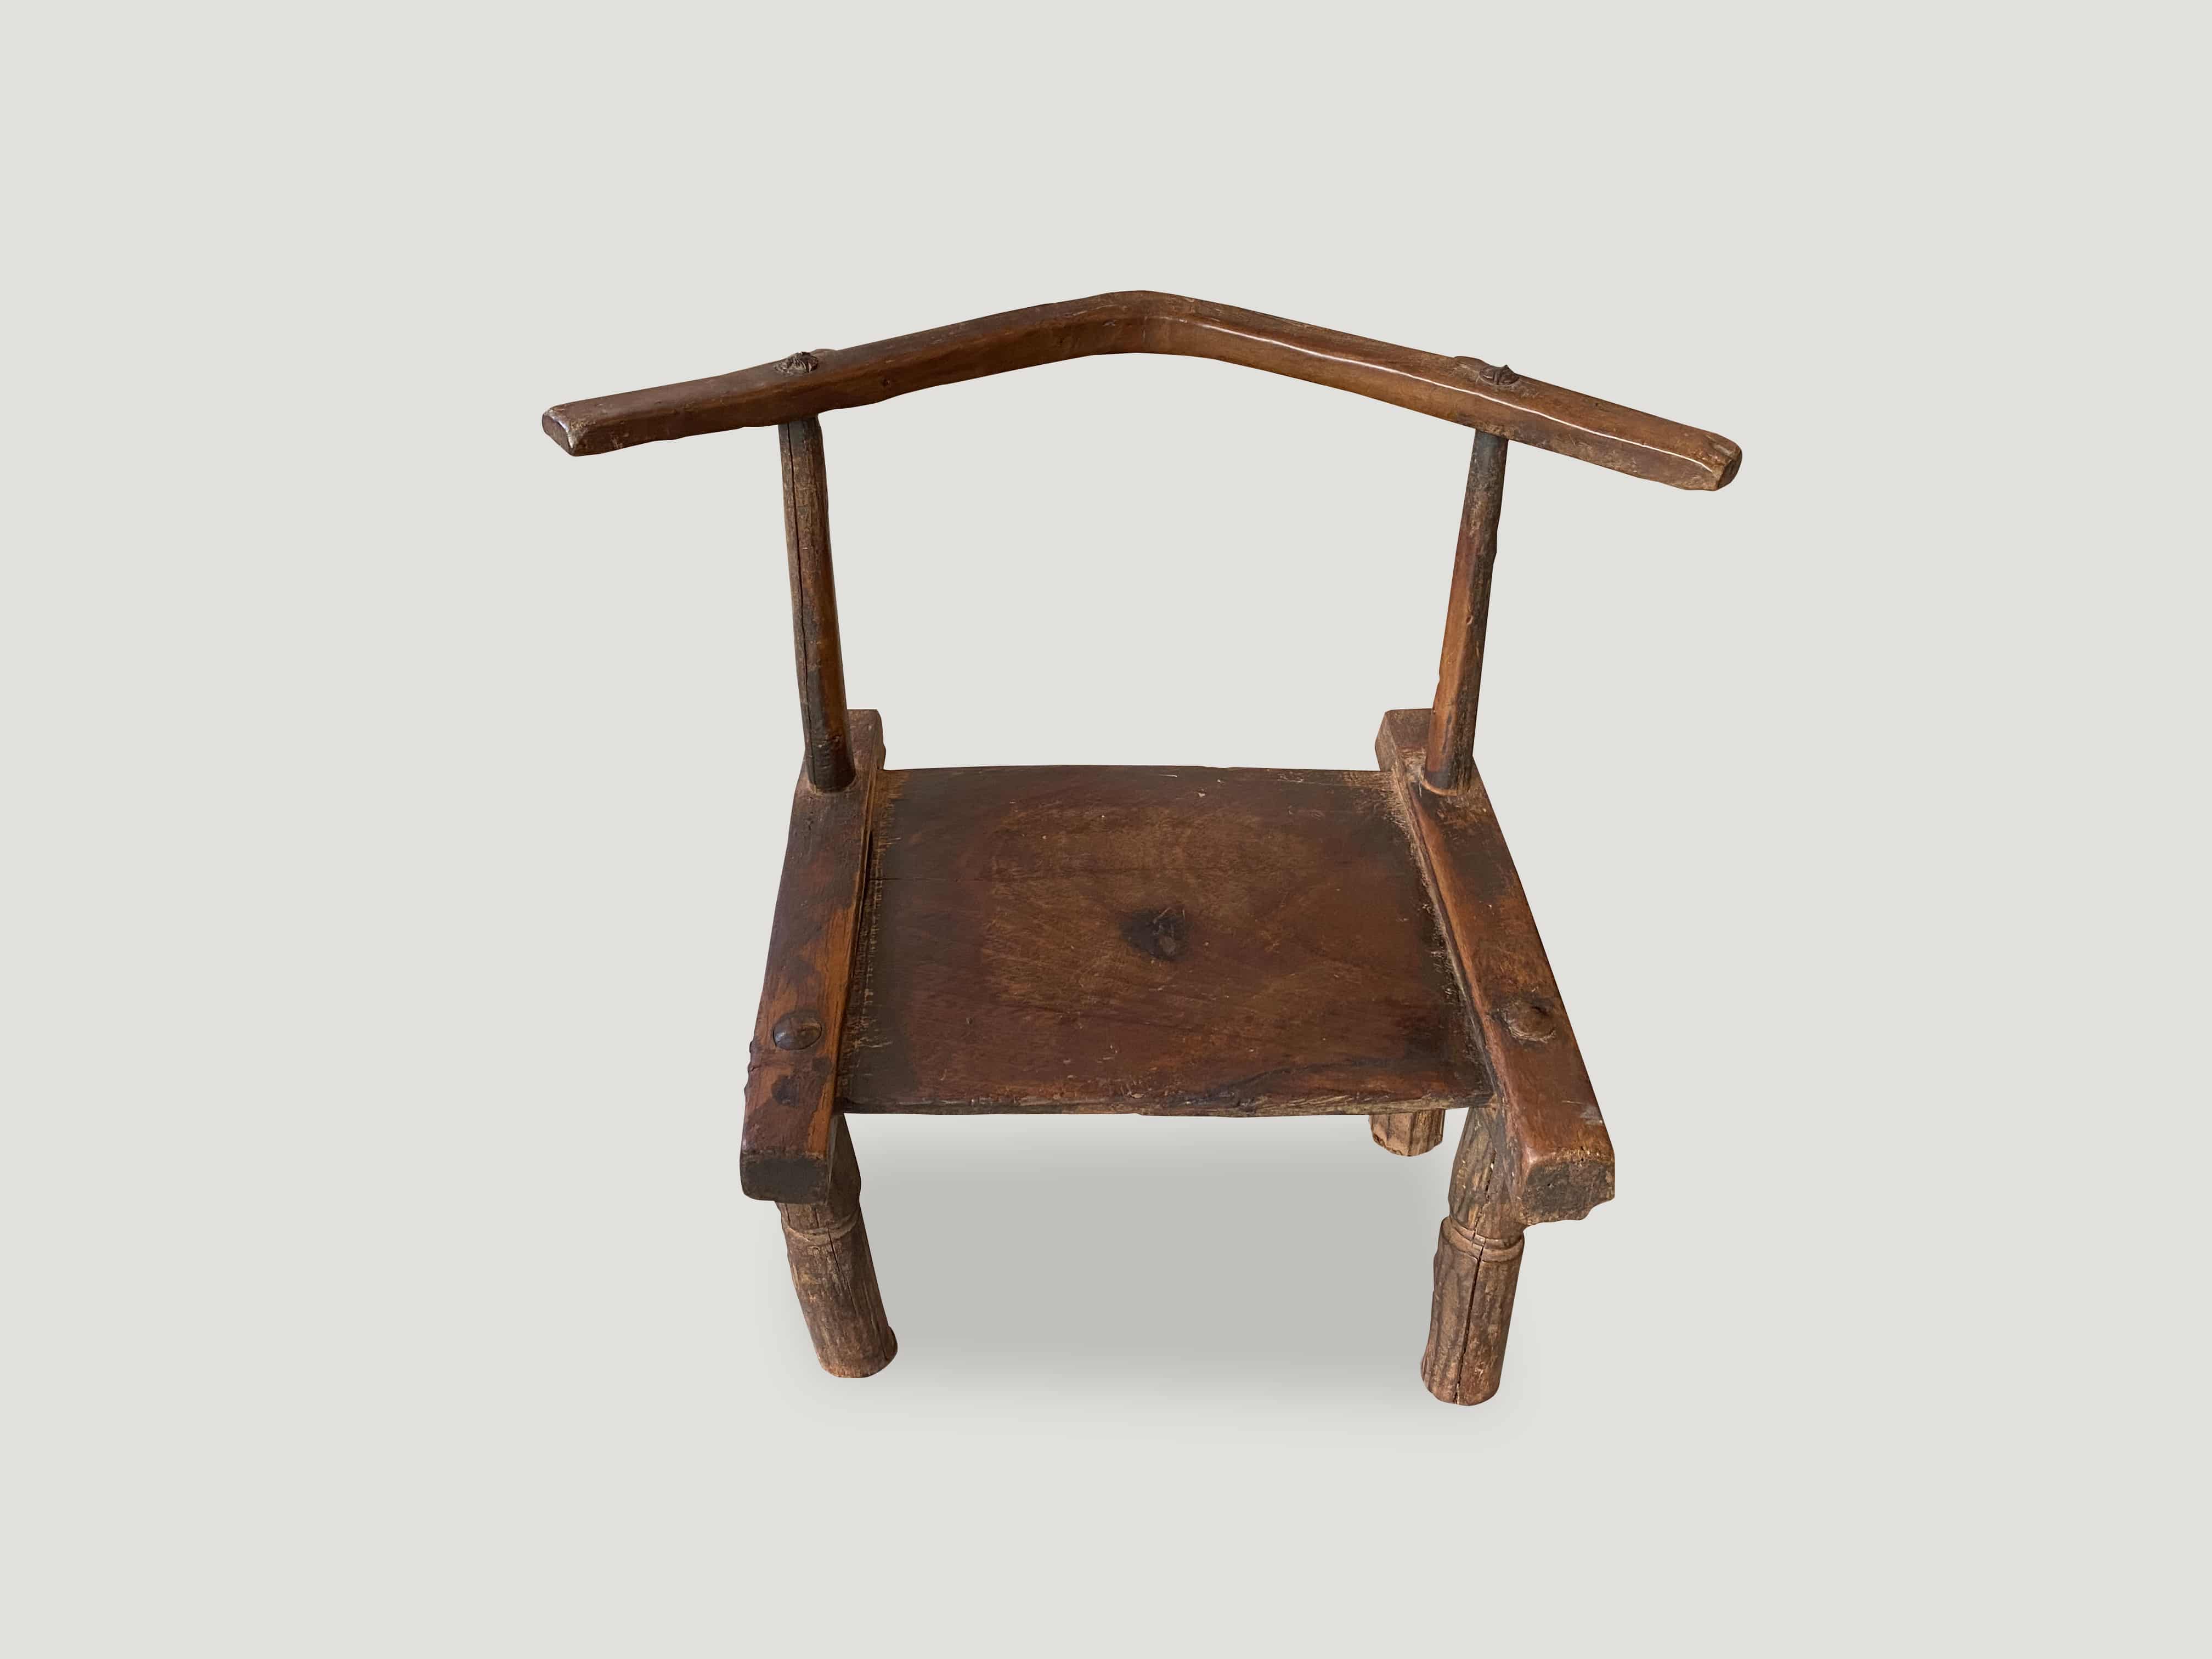 African wooden chair or side table